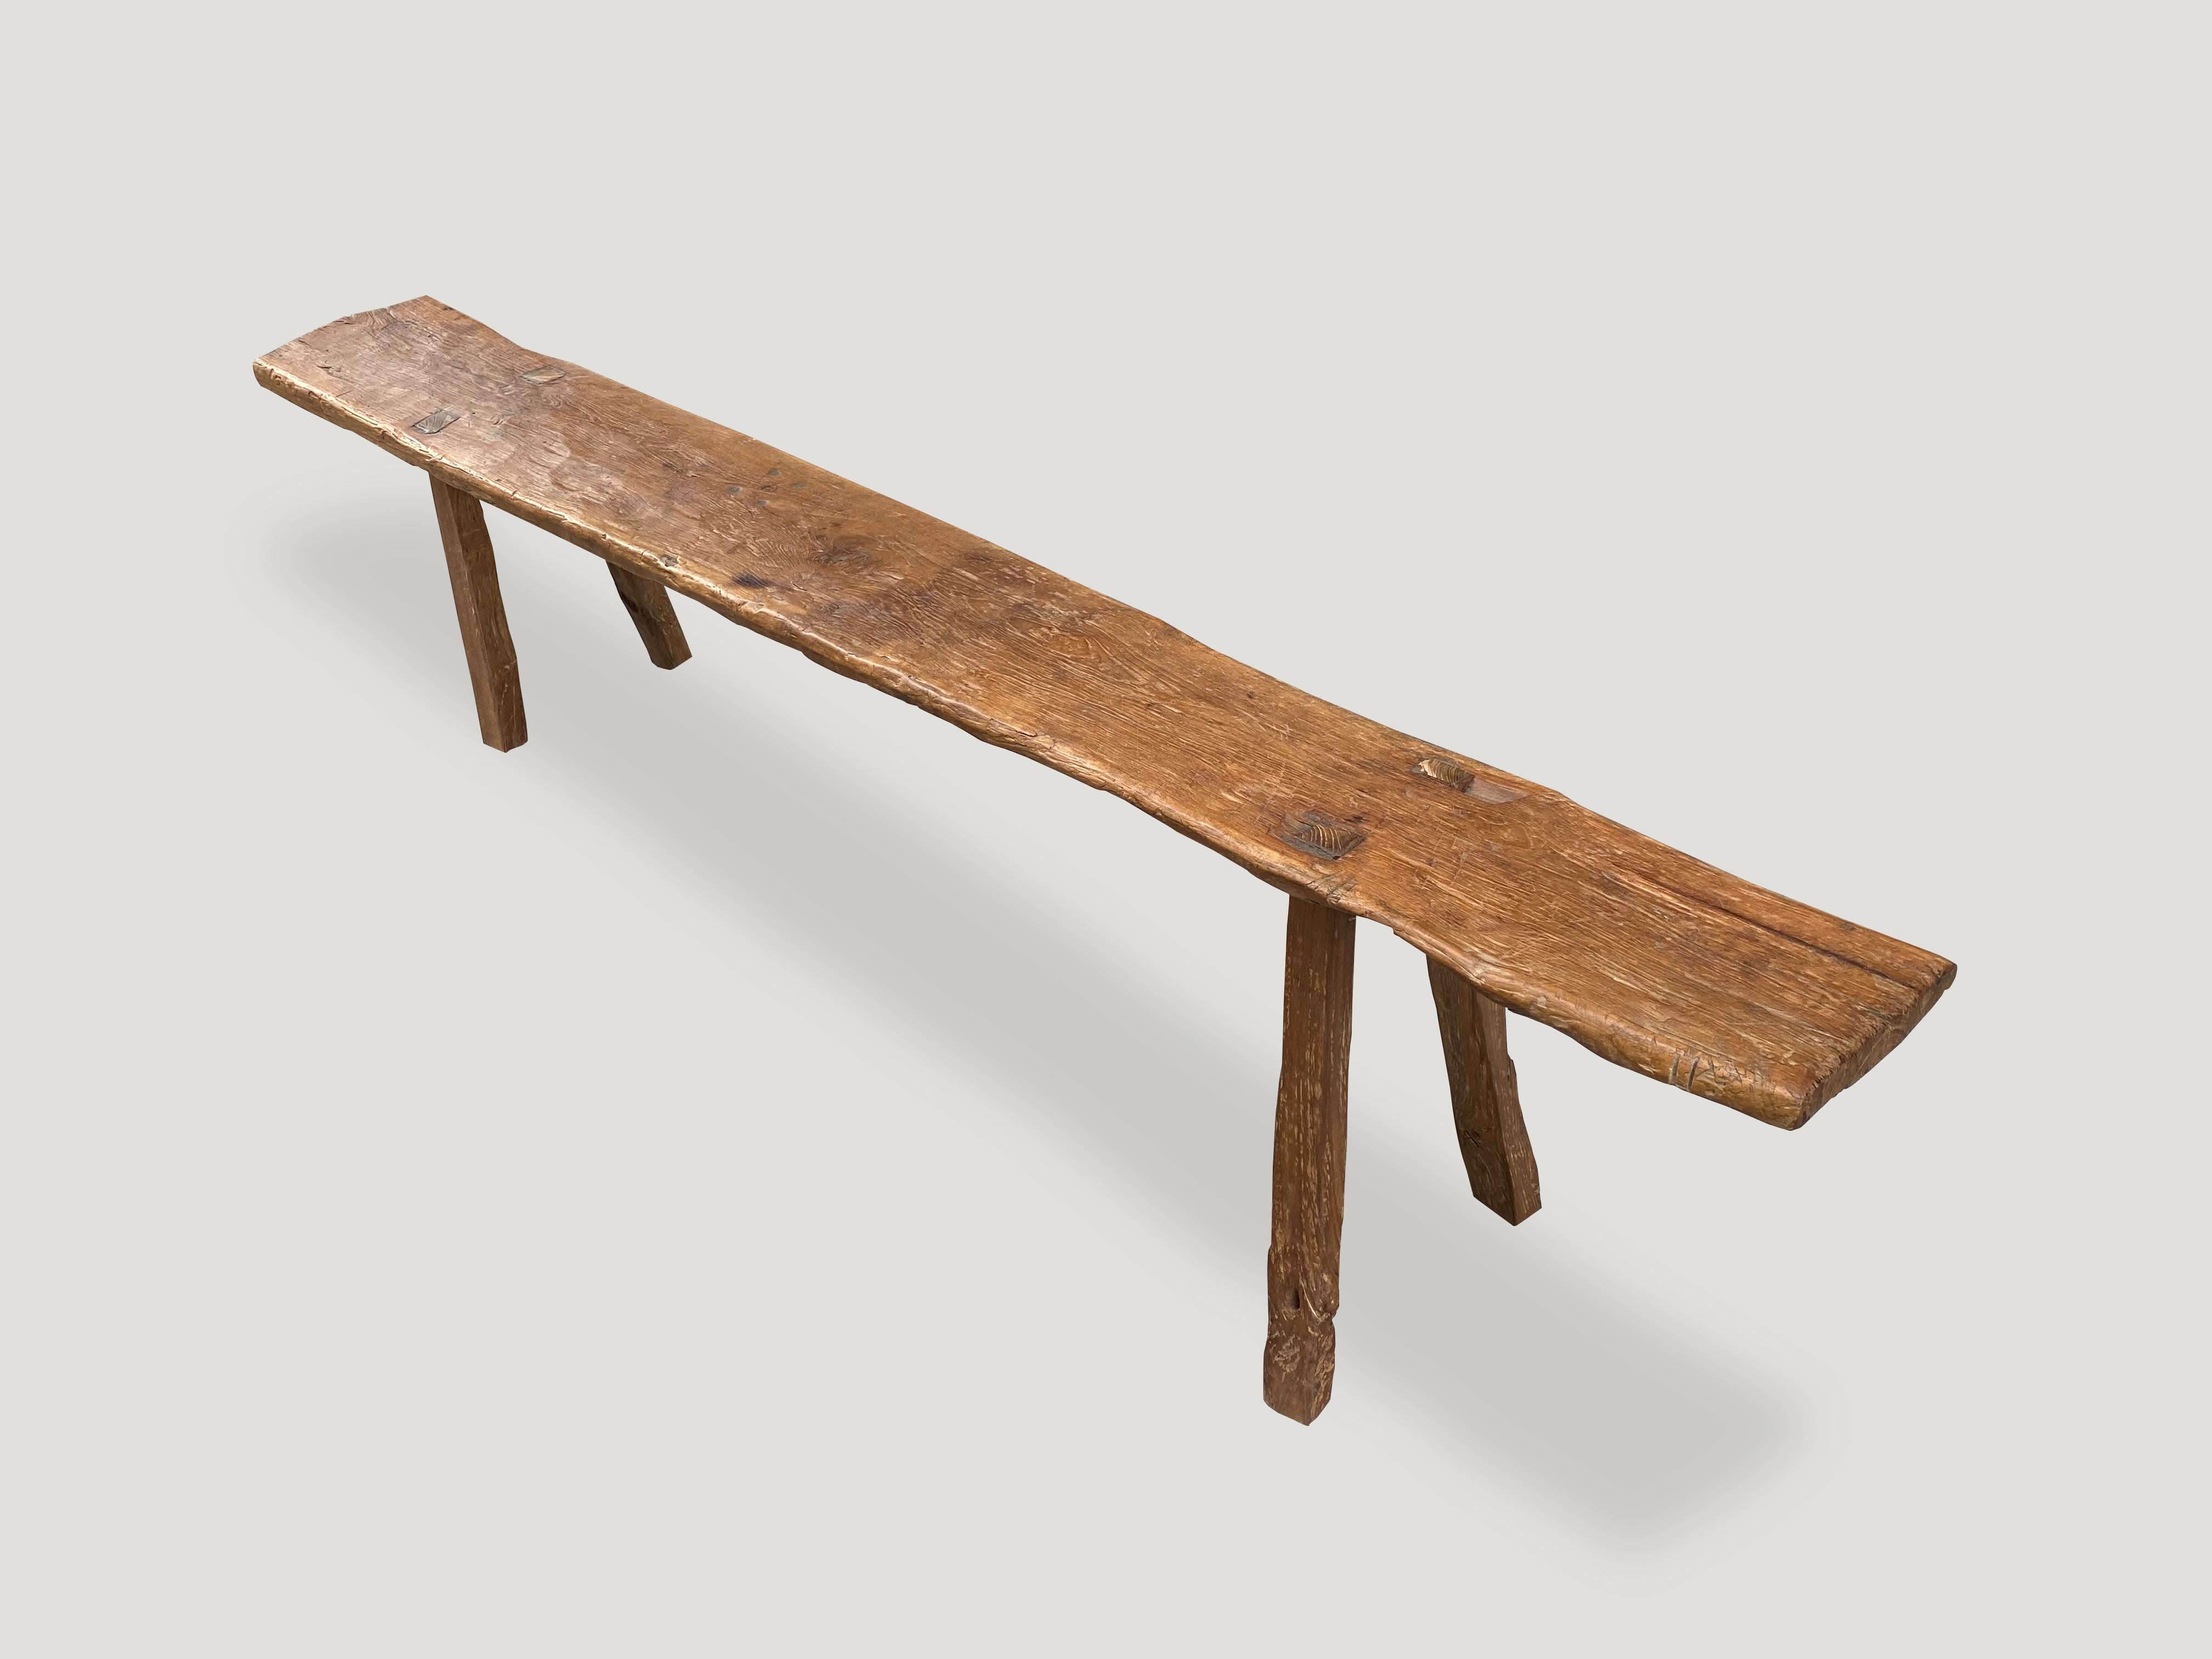 Antique wabi sabi bench made from a single reclaimed teak panel. Perfection is imperfection.

This bench was sourced in the spirit of wabi-sabi, a Japanese philosophy that beauty can be found in imperfection and impermanence. It is a beauty of